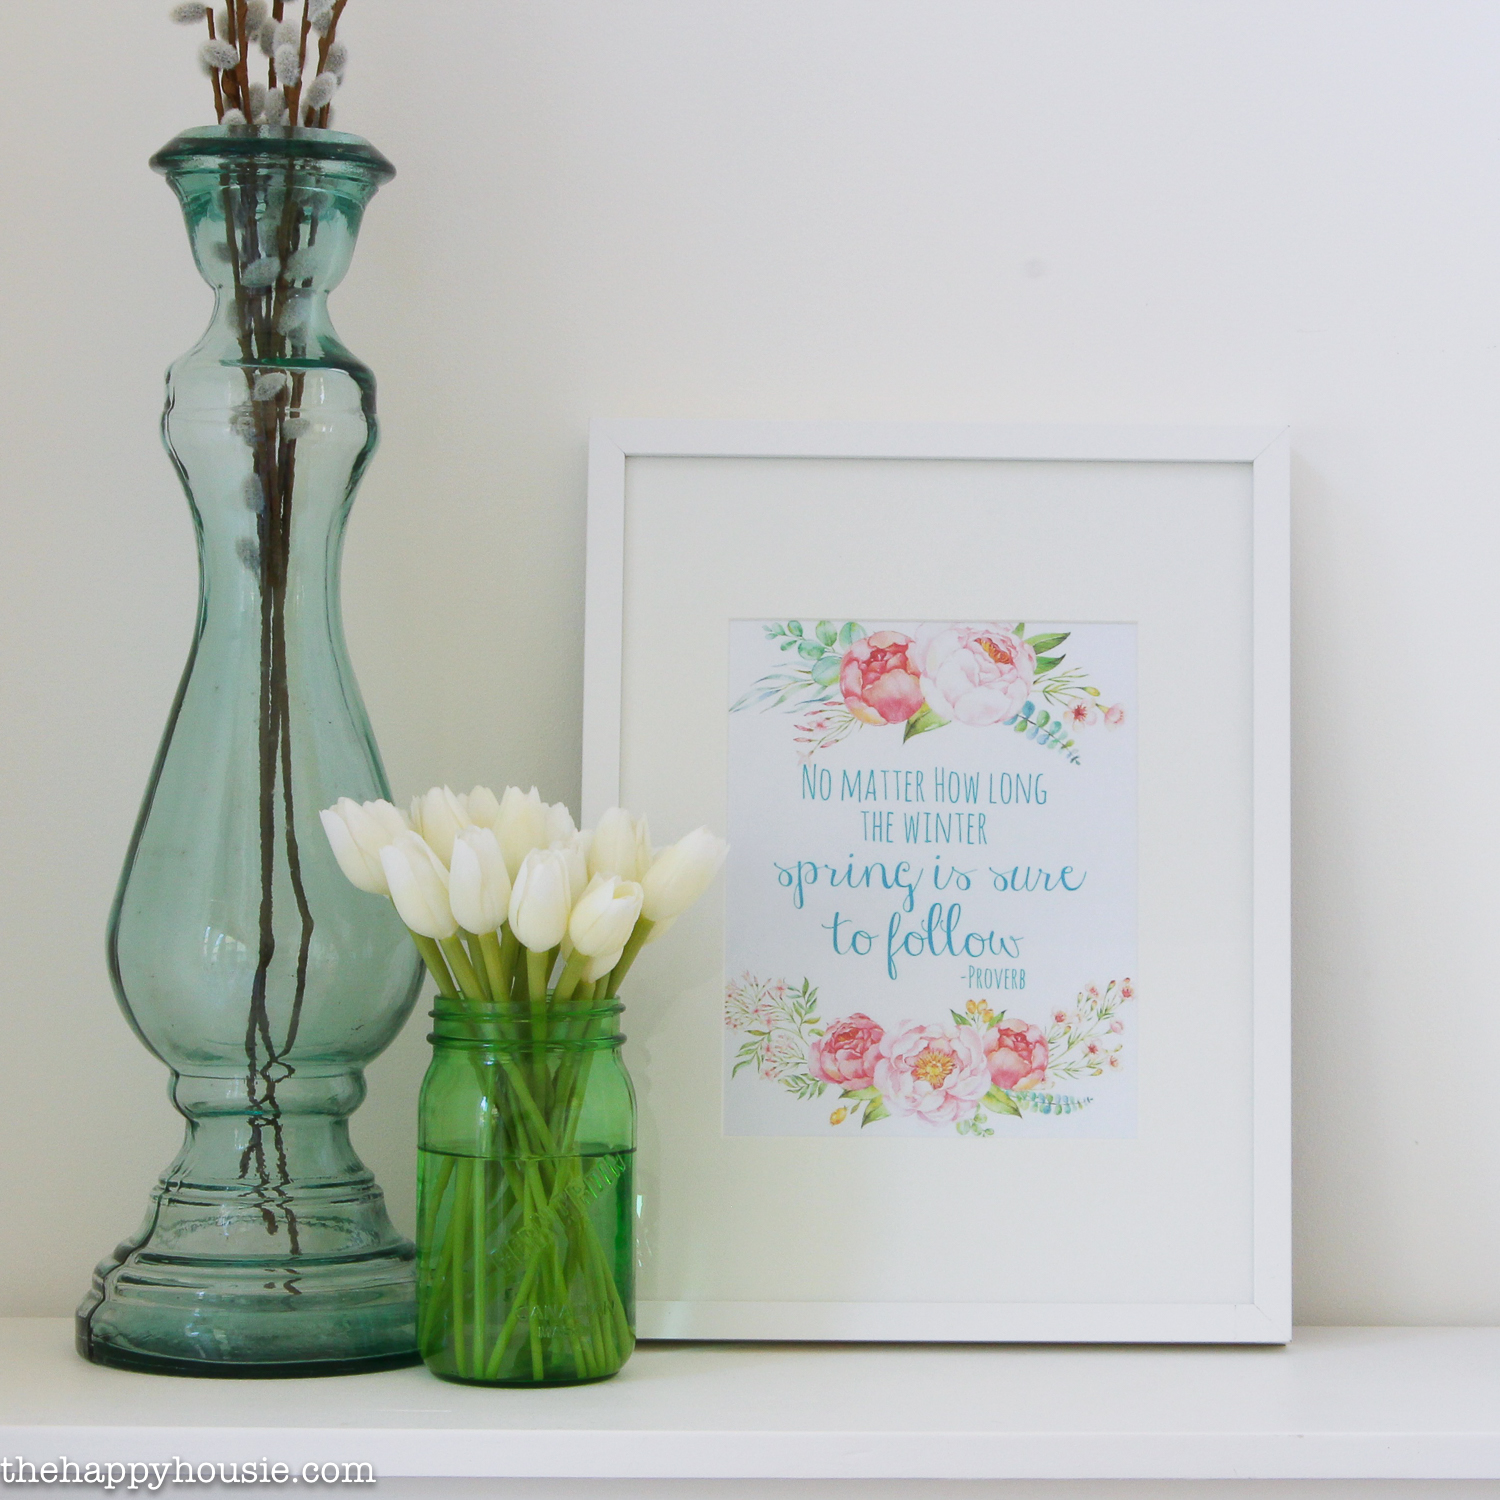 Tulips are in a green glass with a tall vase beside it and a printable.